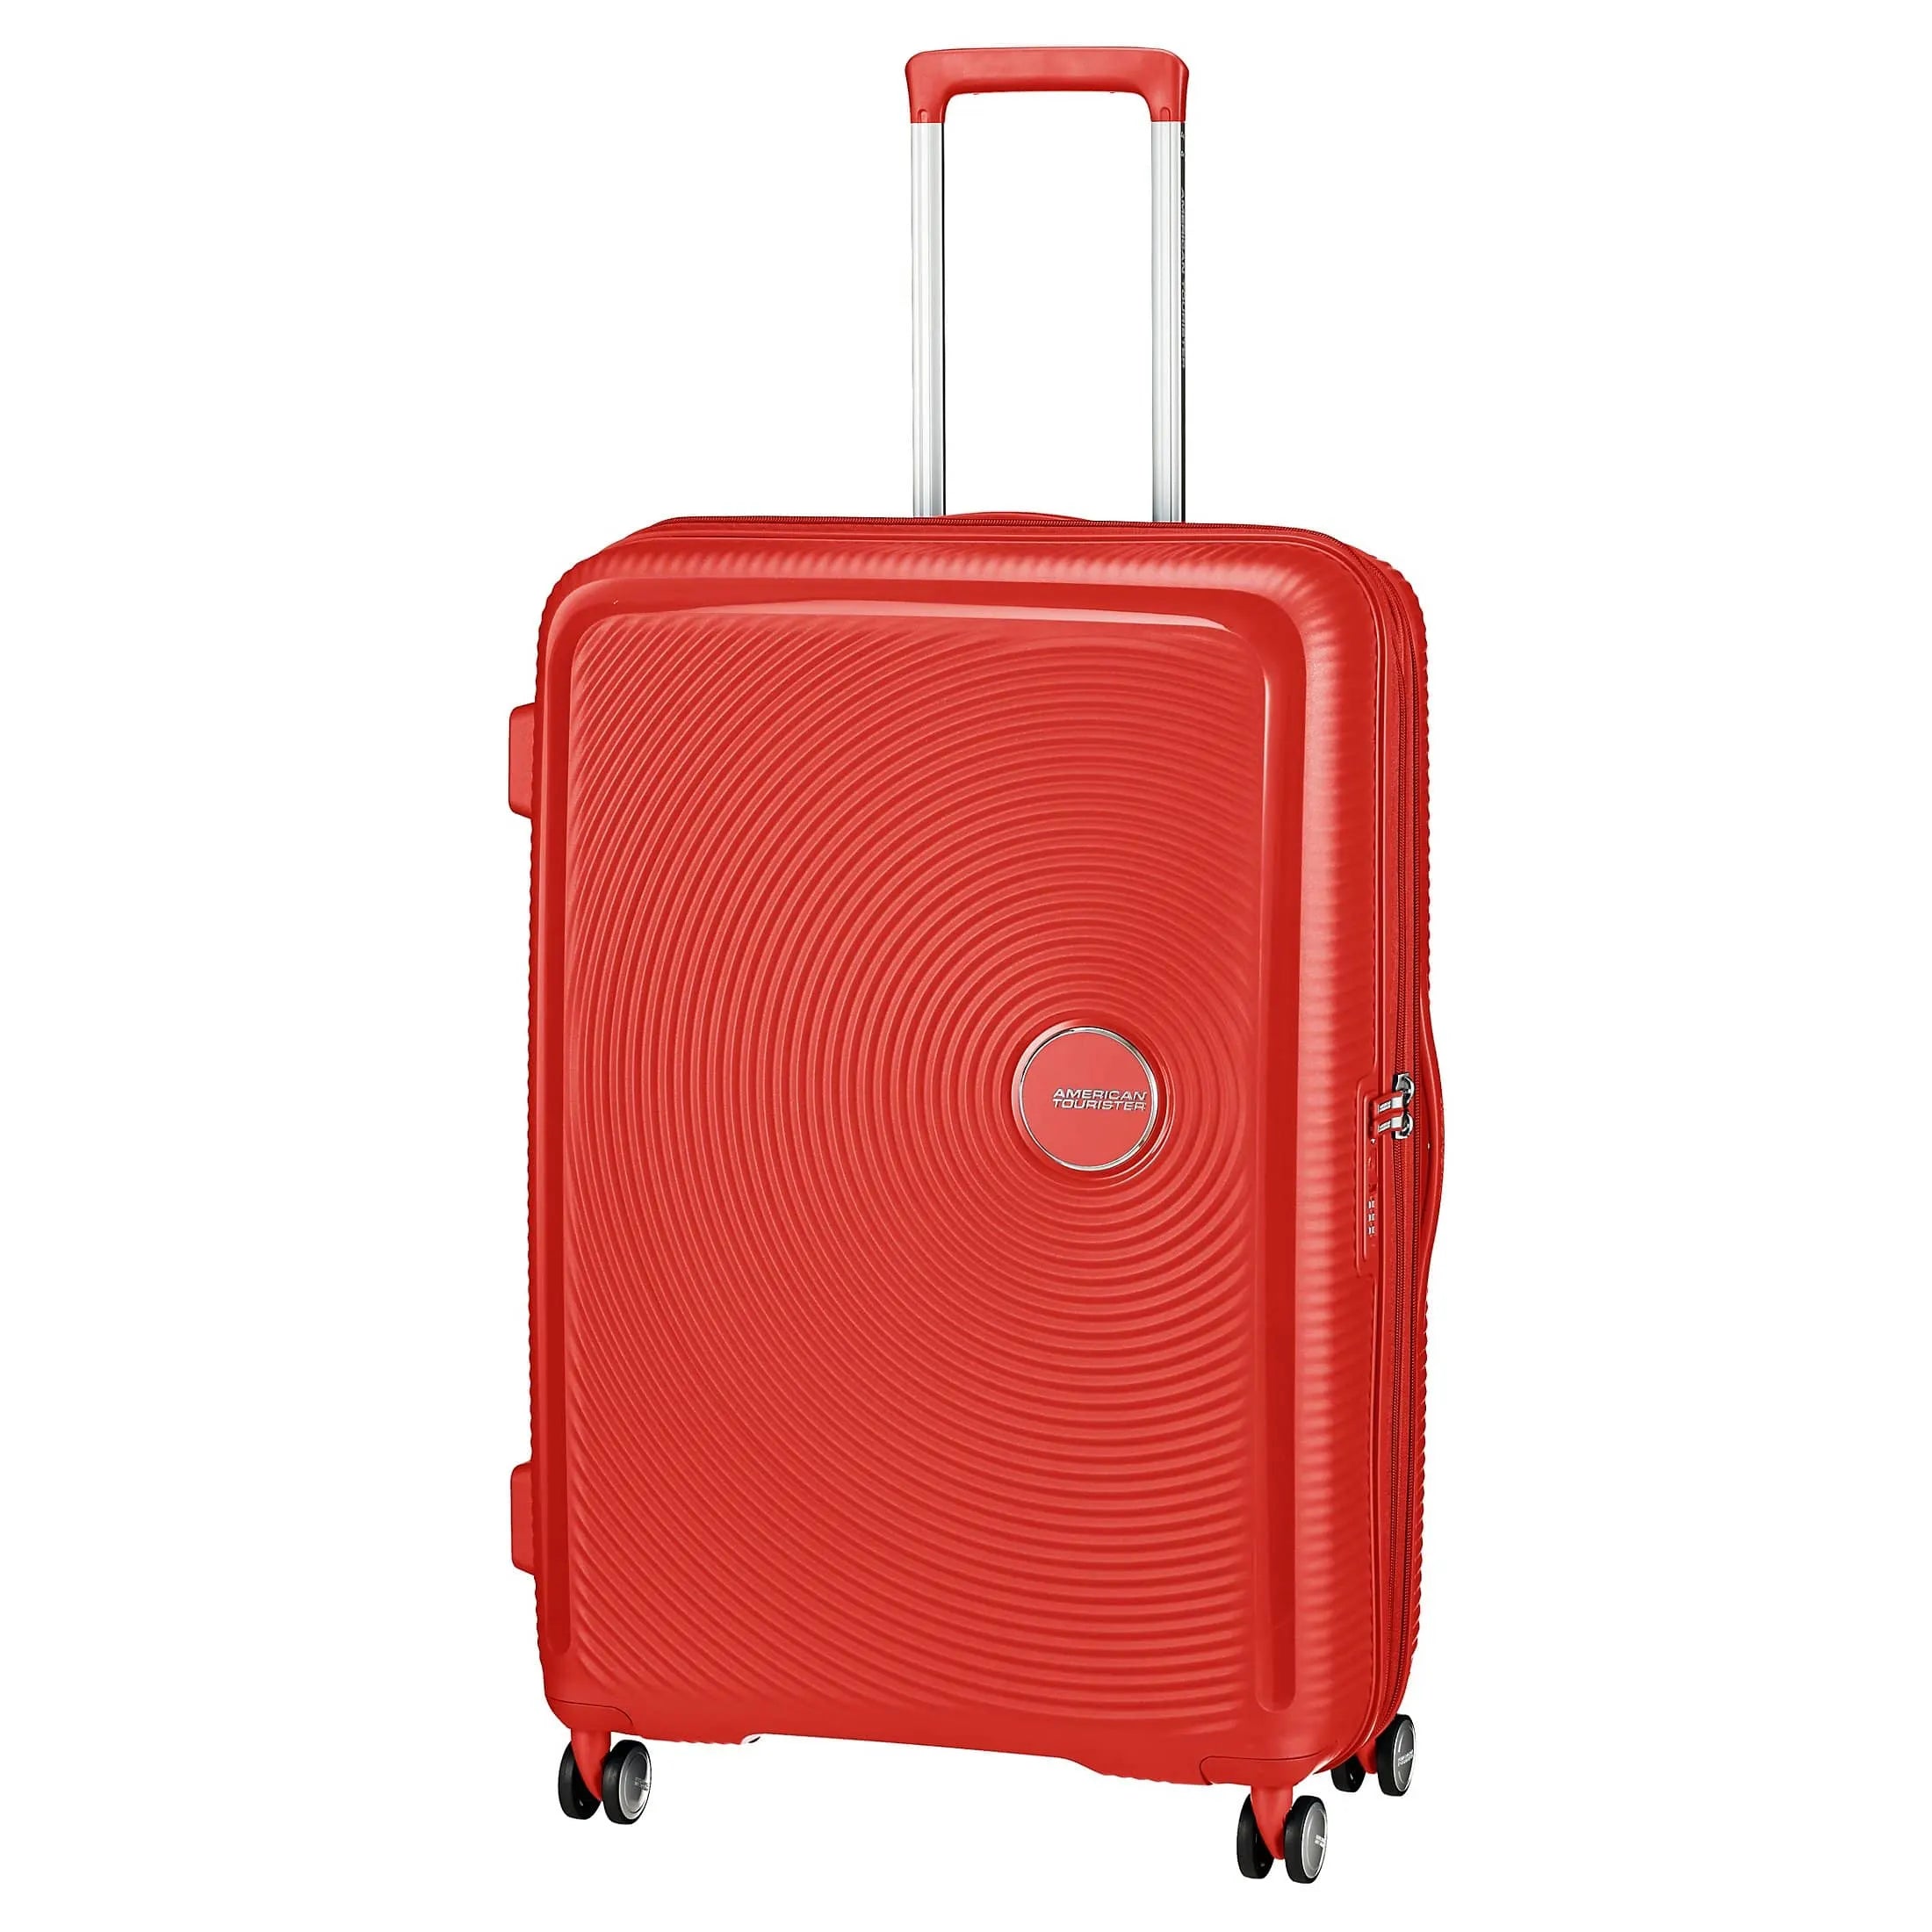 American Tourister Soundbox 4-wheel trolley 77 cm - coral red